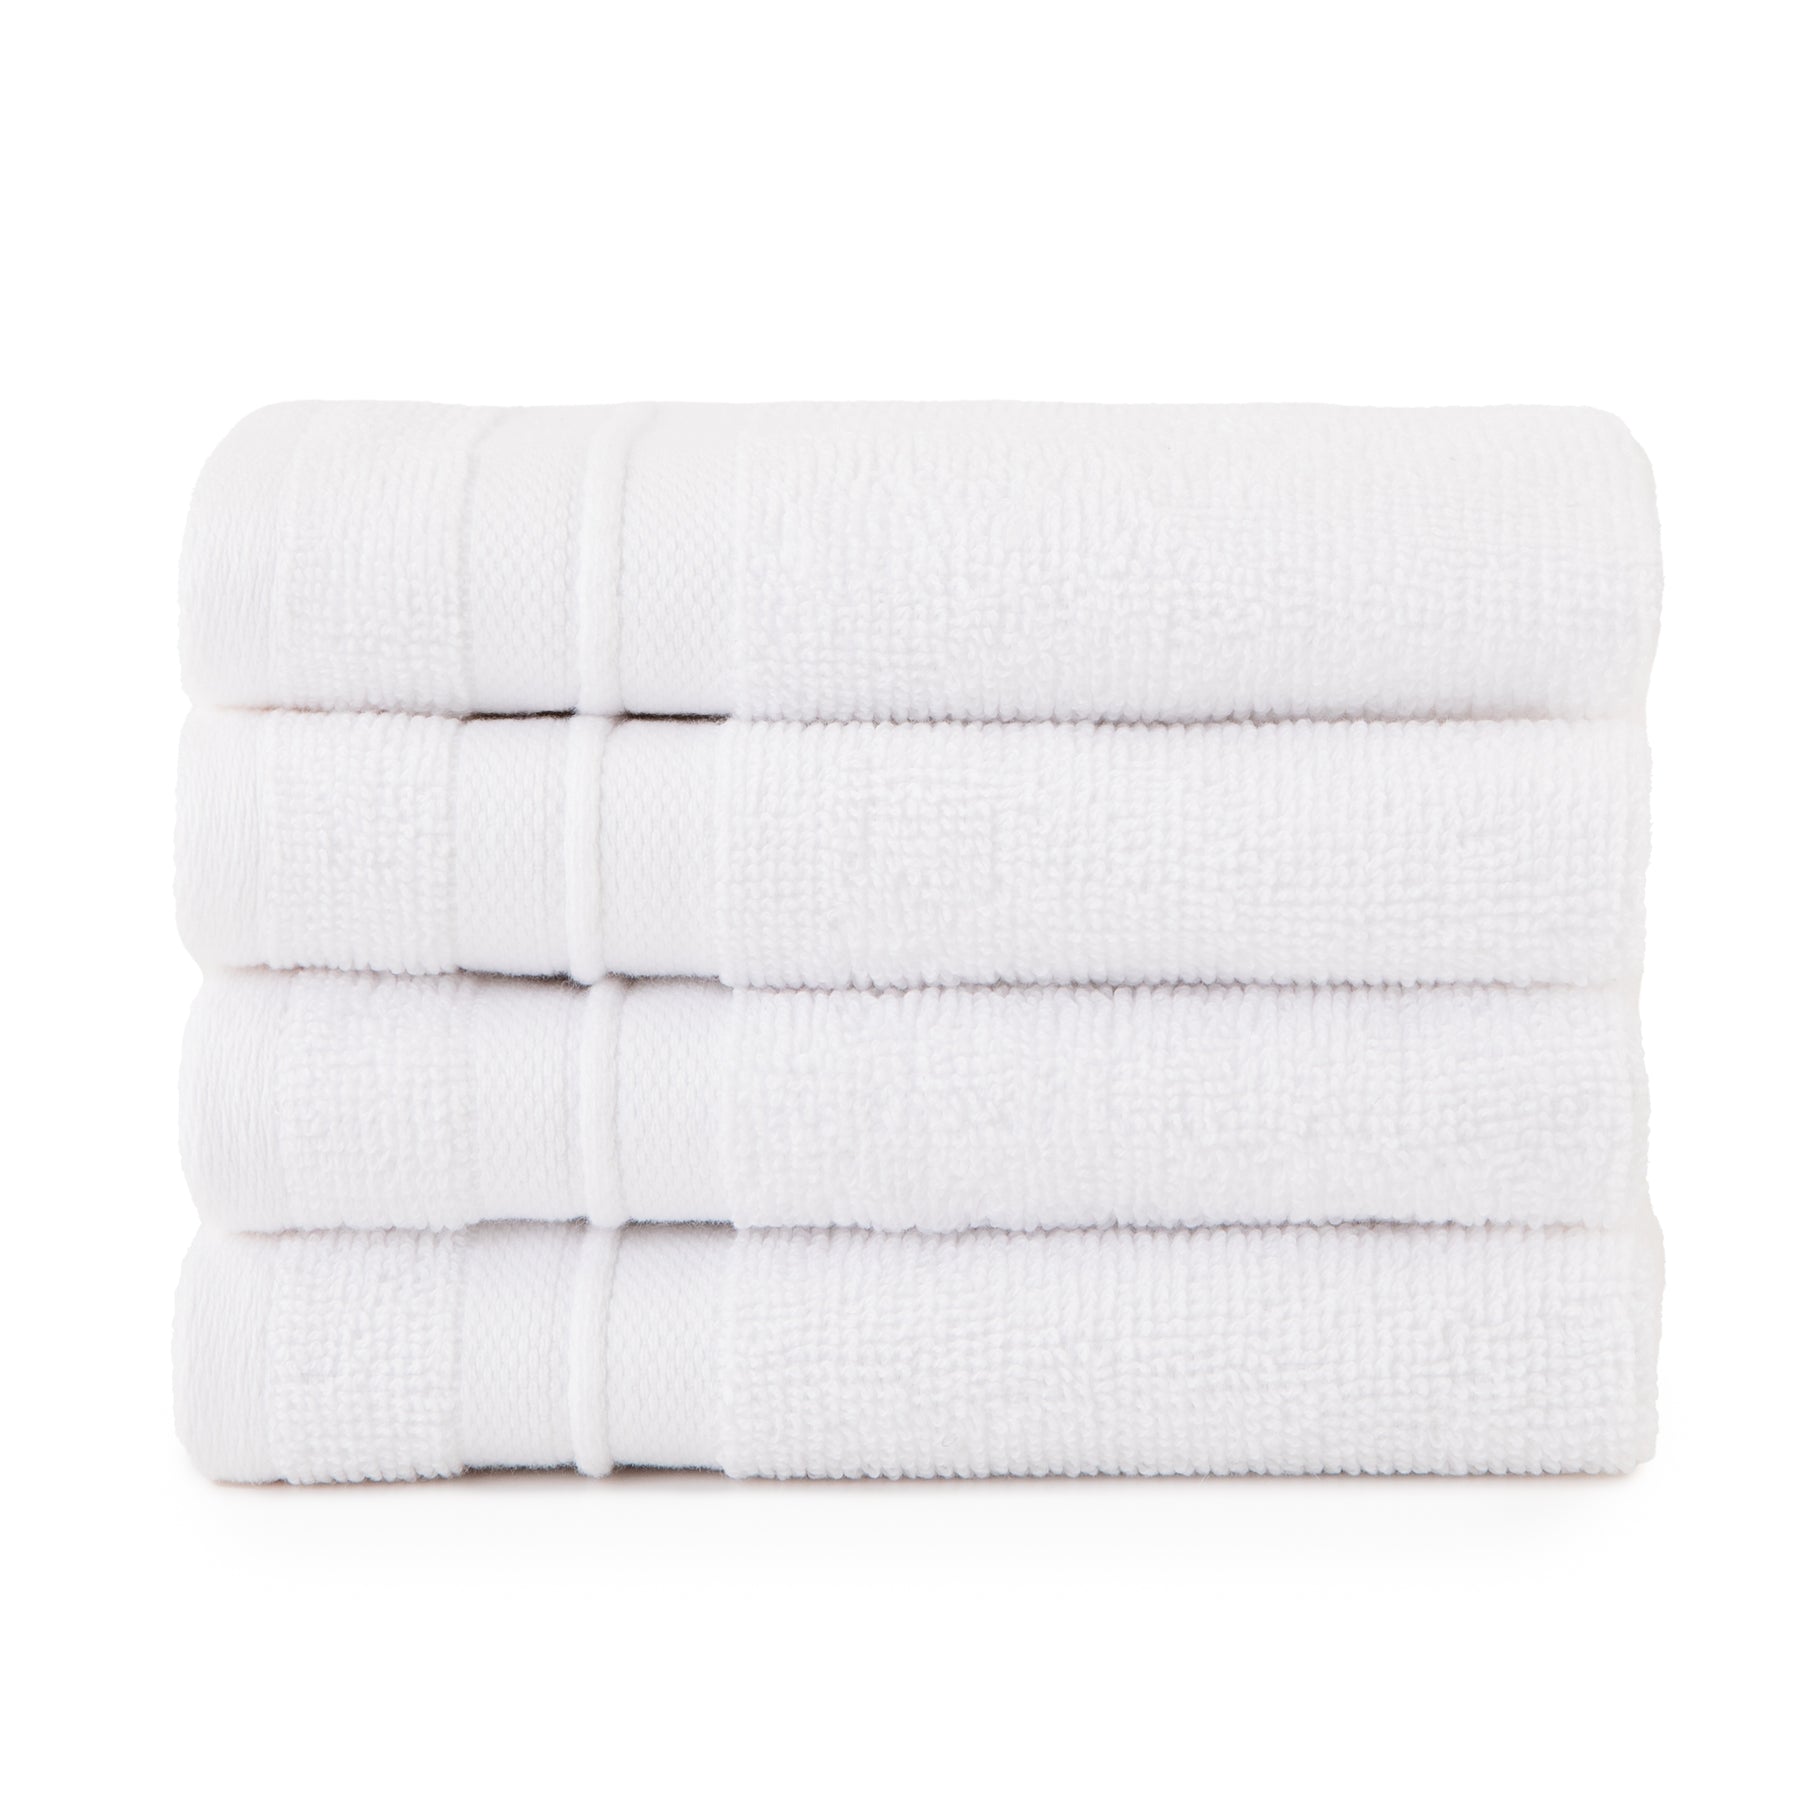 Sticky Toffee Terry Cotton 2 Bath Towels, 2 Hand Towels and 2 Washcloths Bathroom Towel Set of 6, Soft and Absorbent, Tan, Infant Unisex, Size: 6